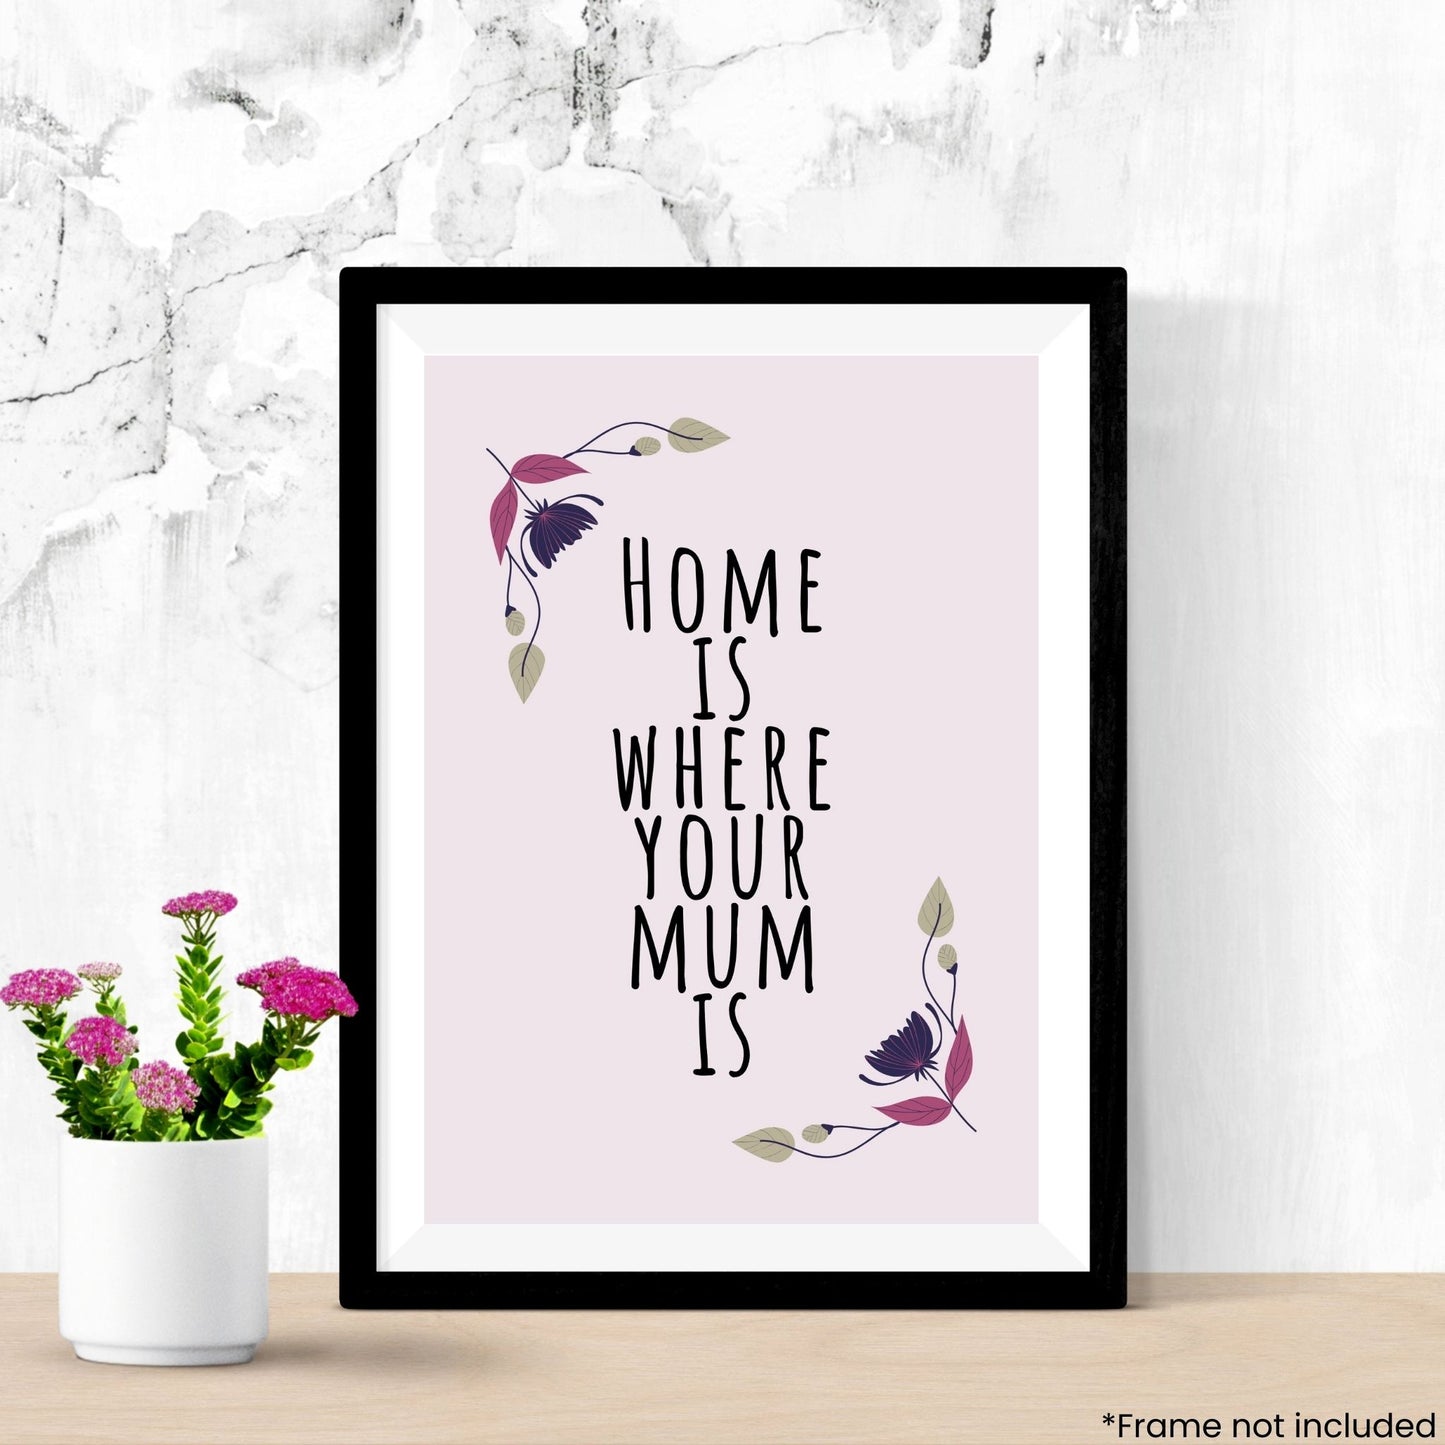 home-is-where-your-mum-is in frame